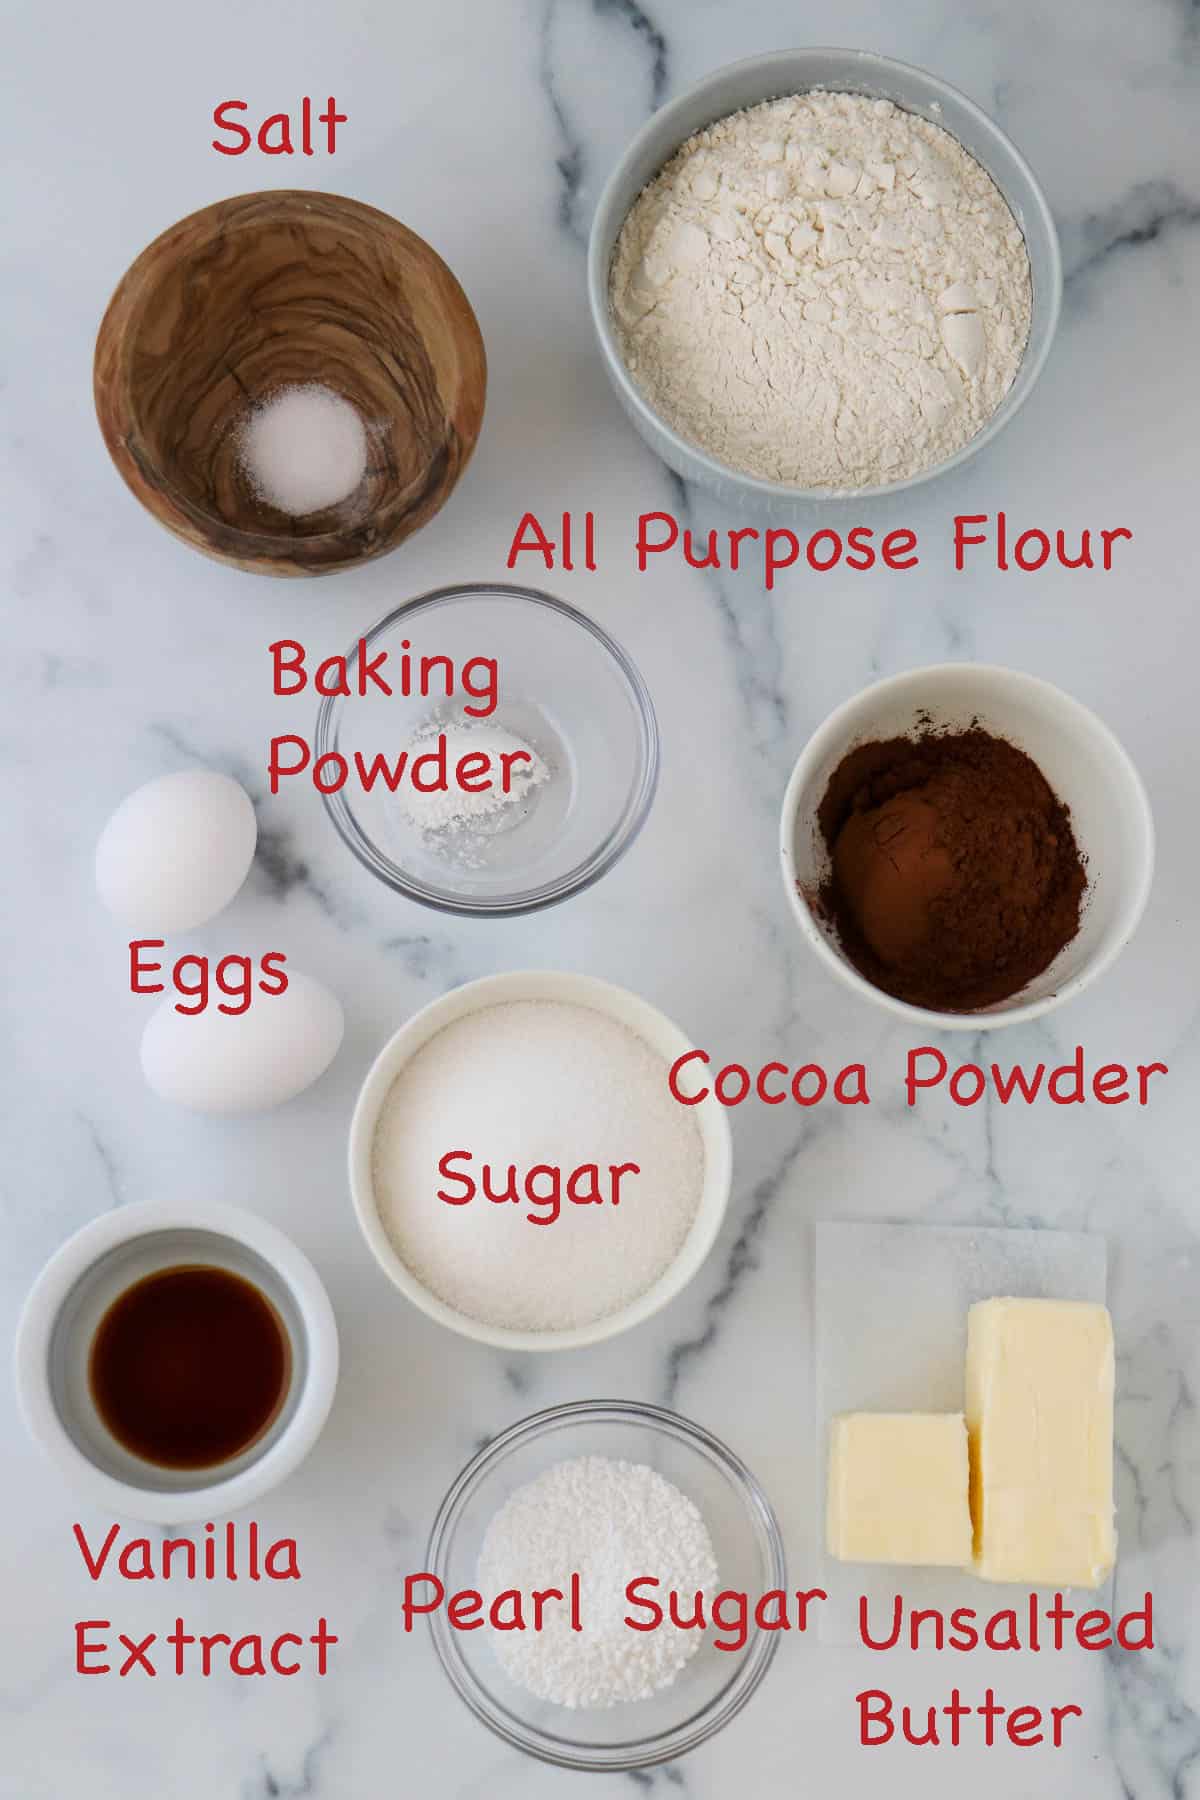 Labeled ingredients for Swedish Chocolate Slice Cookies (Chokladsnittar).